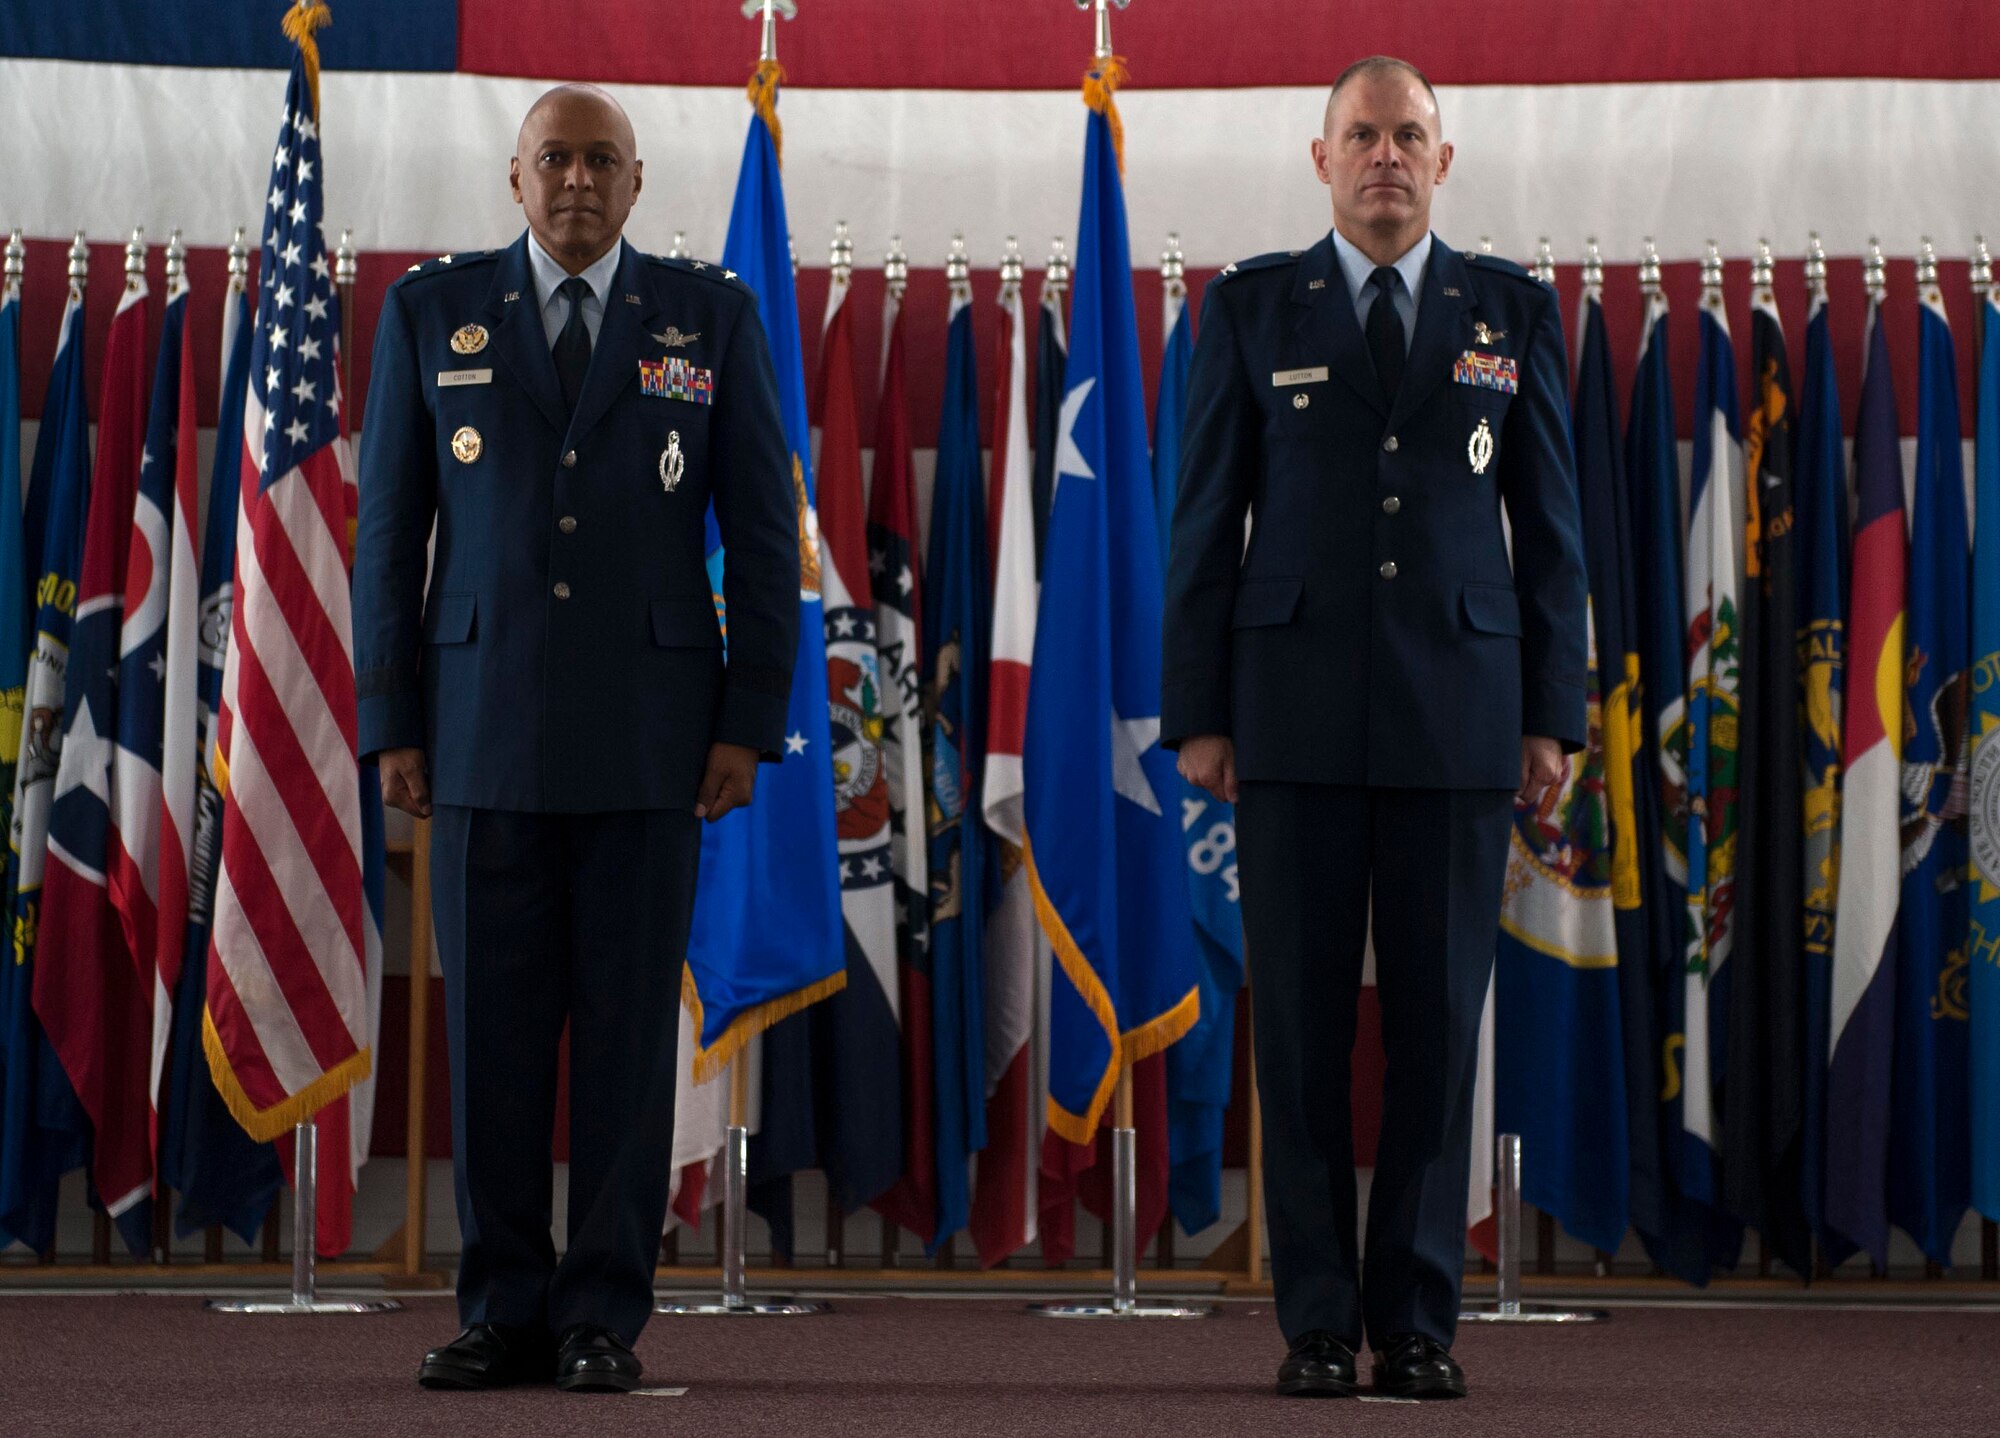 New Brig. Gen. Michael Lutton, who is headed to the Pentagon to work with the Department of Energy, is presented his Brig. Gen. flag by Tech. Sgt. Joshua Hull, non-commissioned officer in charge of Base Honor Guard, at Minot Air Force Base, N.D., June 17, 2016. The presentation of the General flag is an Air Force tradition. (U.S. Air Force photo/Senior Airman Kristoffer Kaubisch) 